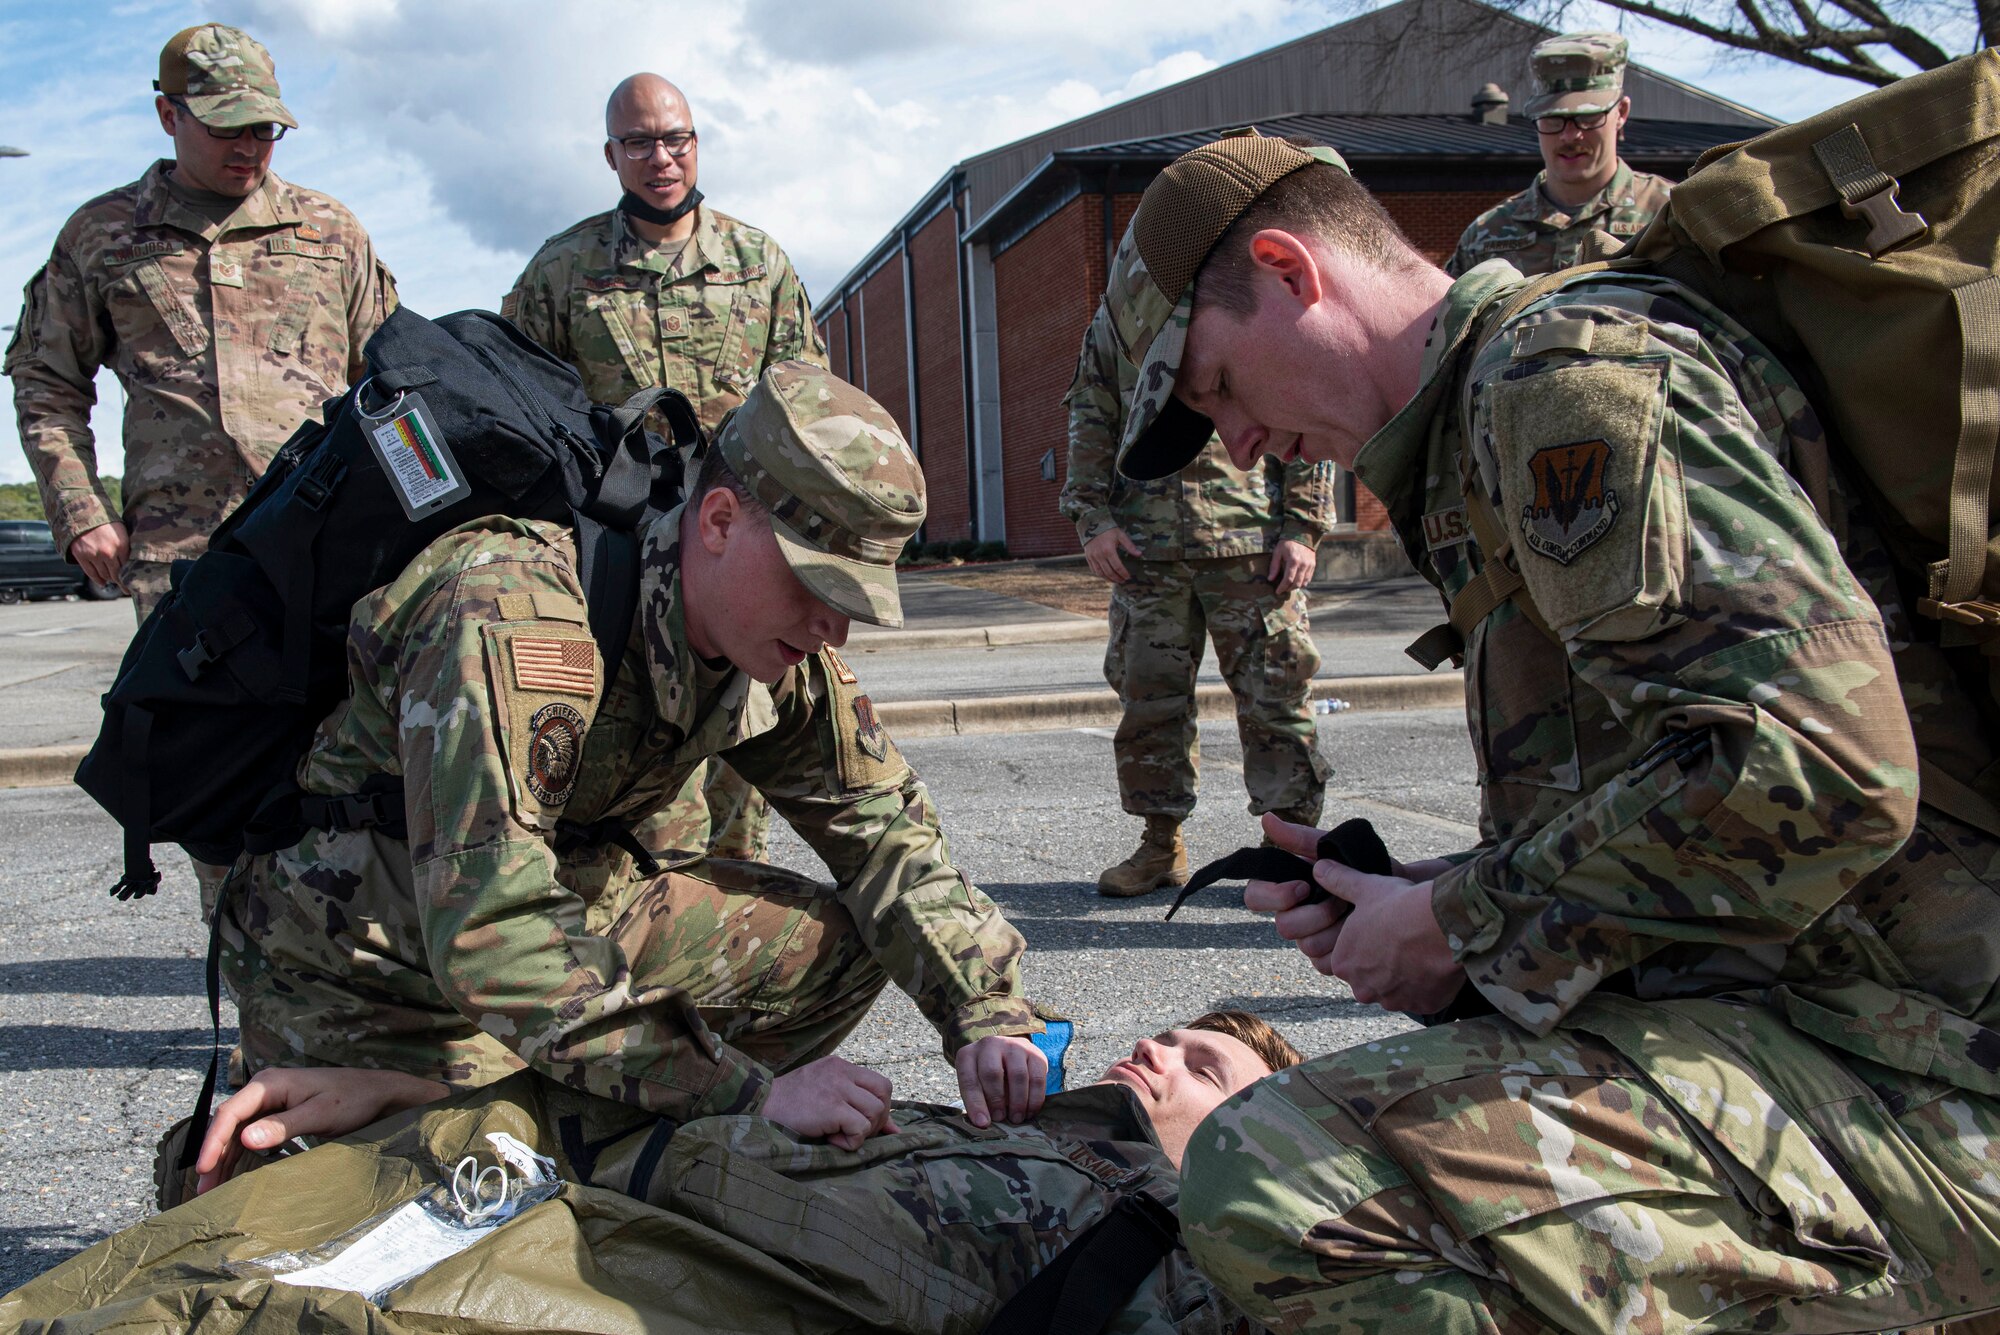 Airmen assigned to the 4th Fighter Wing participate in tactical casualty combat care training at Seymour Johnson Air Force Base, North Carolina, Feb. 18, 2022. TCCC training provides participants with skills needed to respond to and treat injured personnel during real-world scenarios. (U.S. Air Force photo by Airman 1st Class Sabrina Fuller)